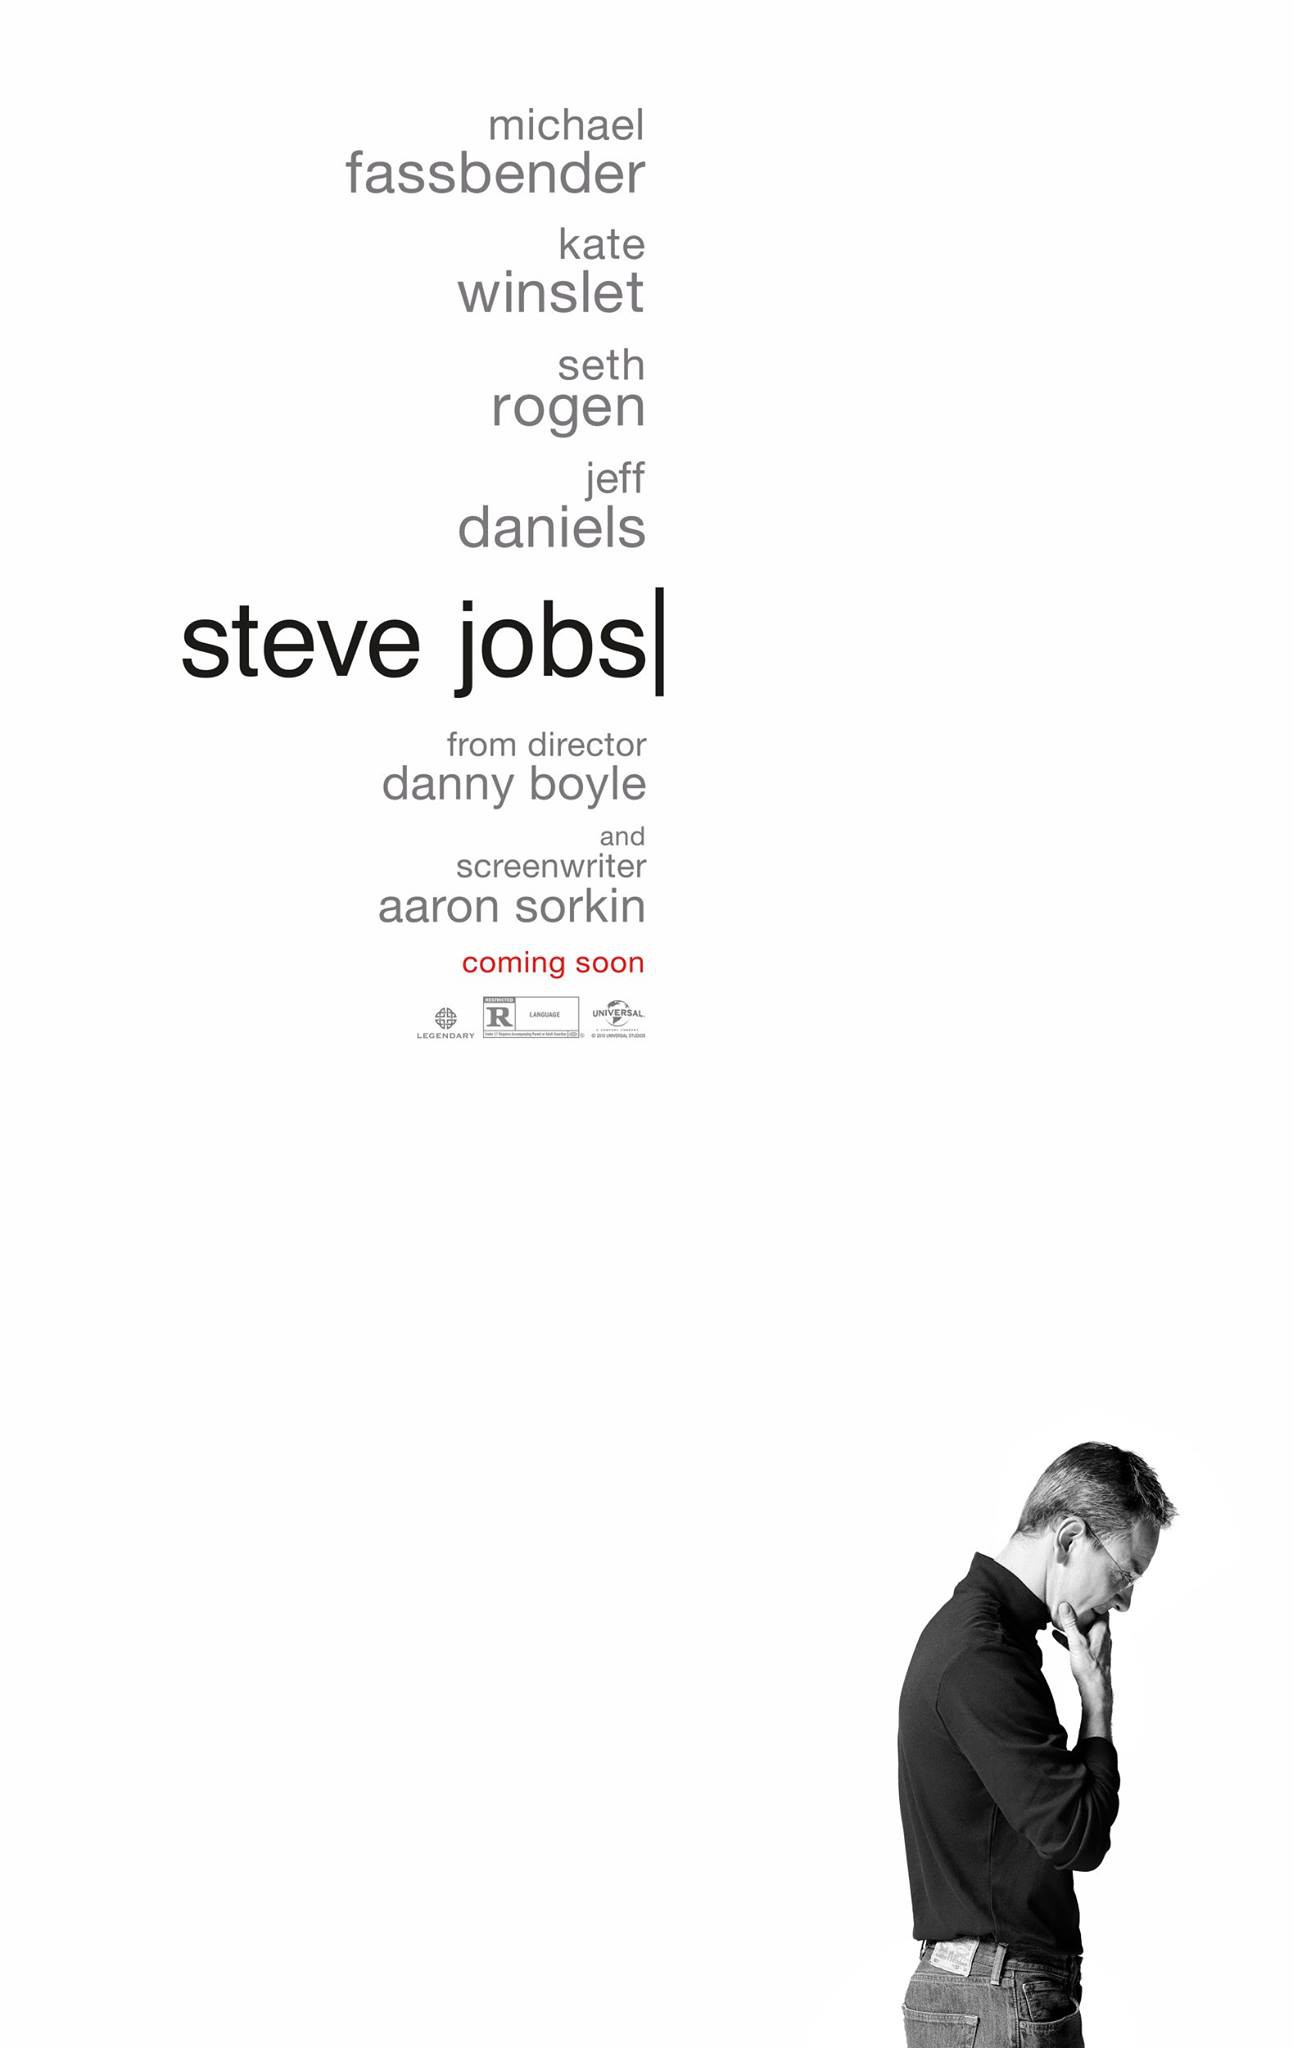 Steve Jobs Movie Reviewed as &#039;Brilliant, Infuriating and Richly Unconventional&#039;